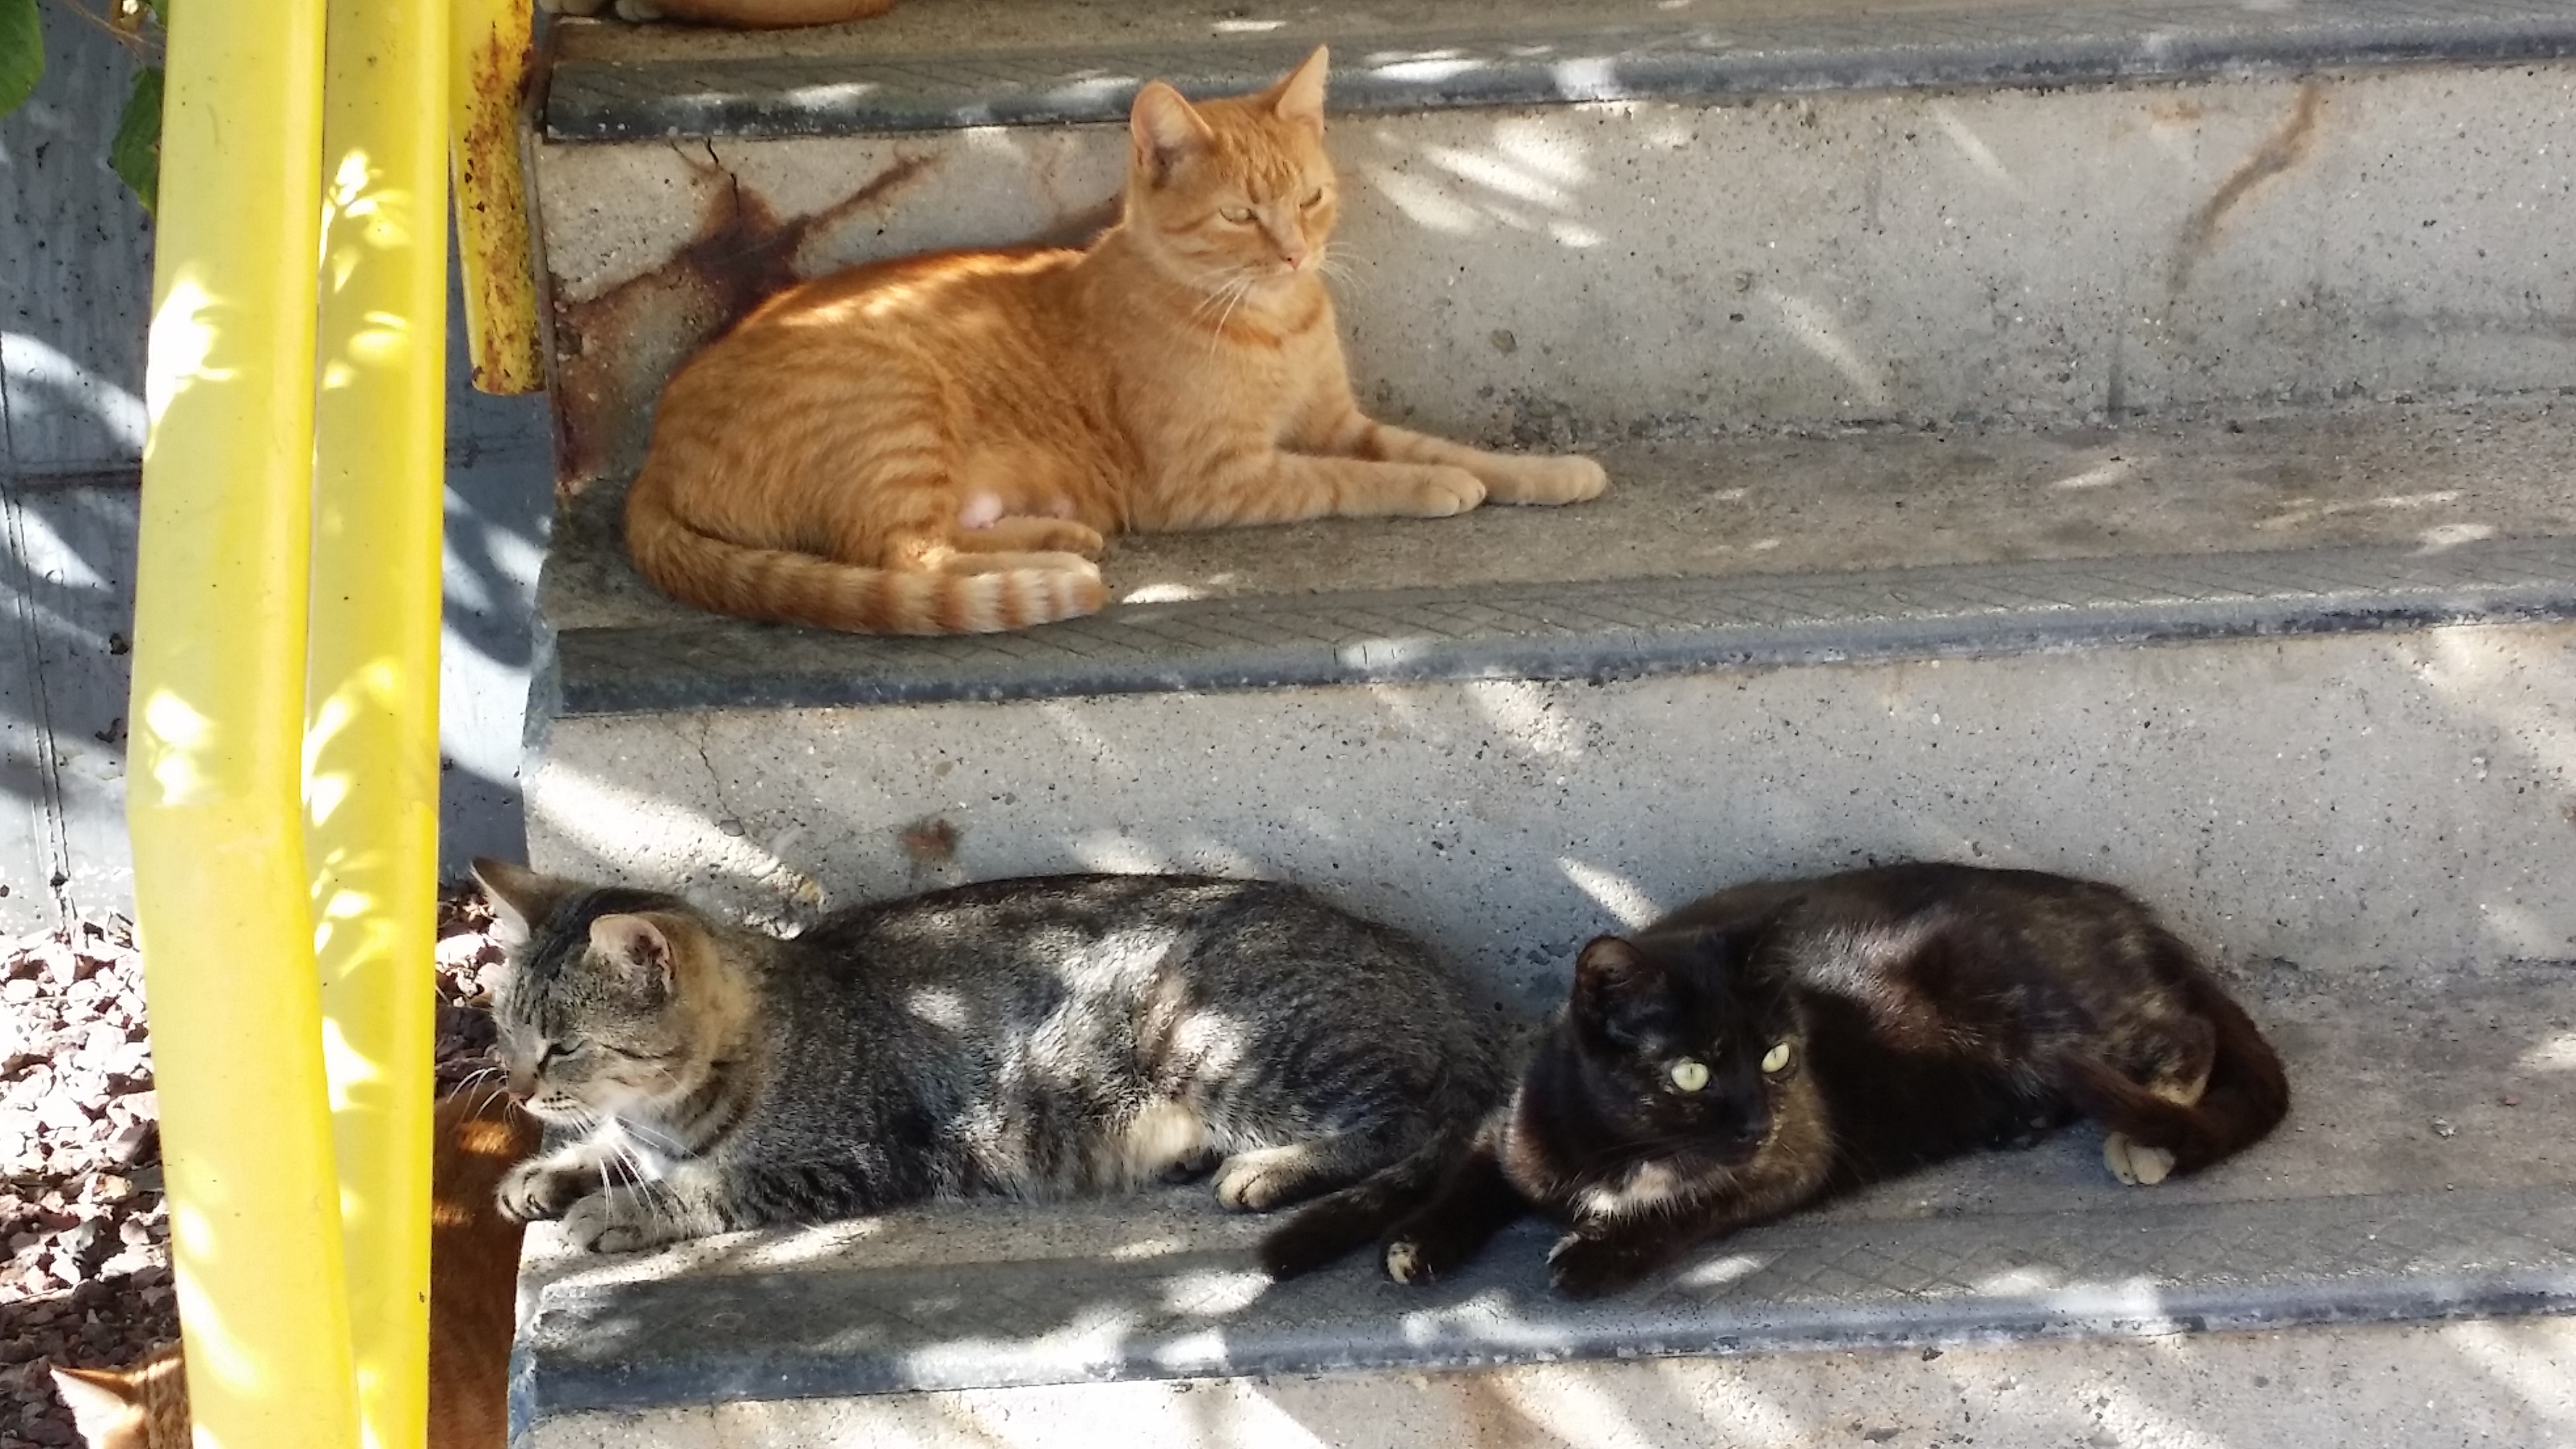 These cats have made a Jackson County incinerator their home. (credit: Lori W. Pelham)